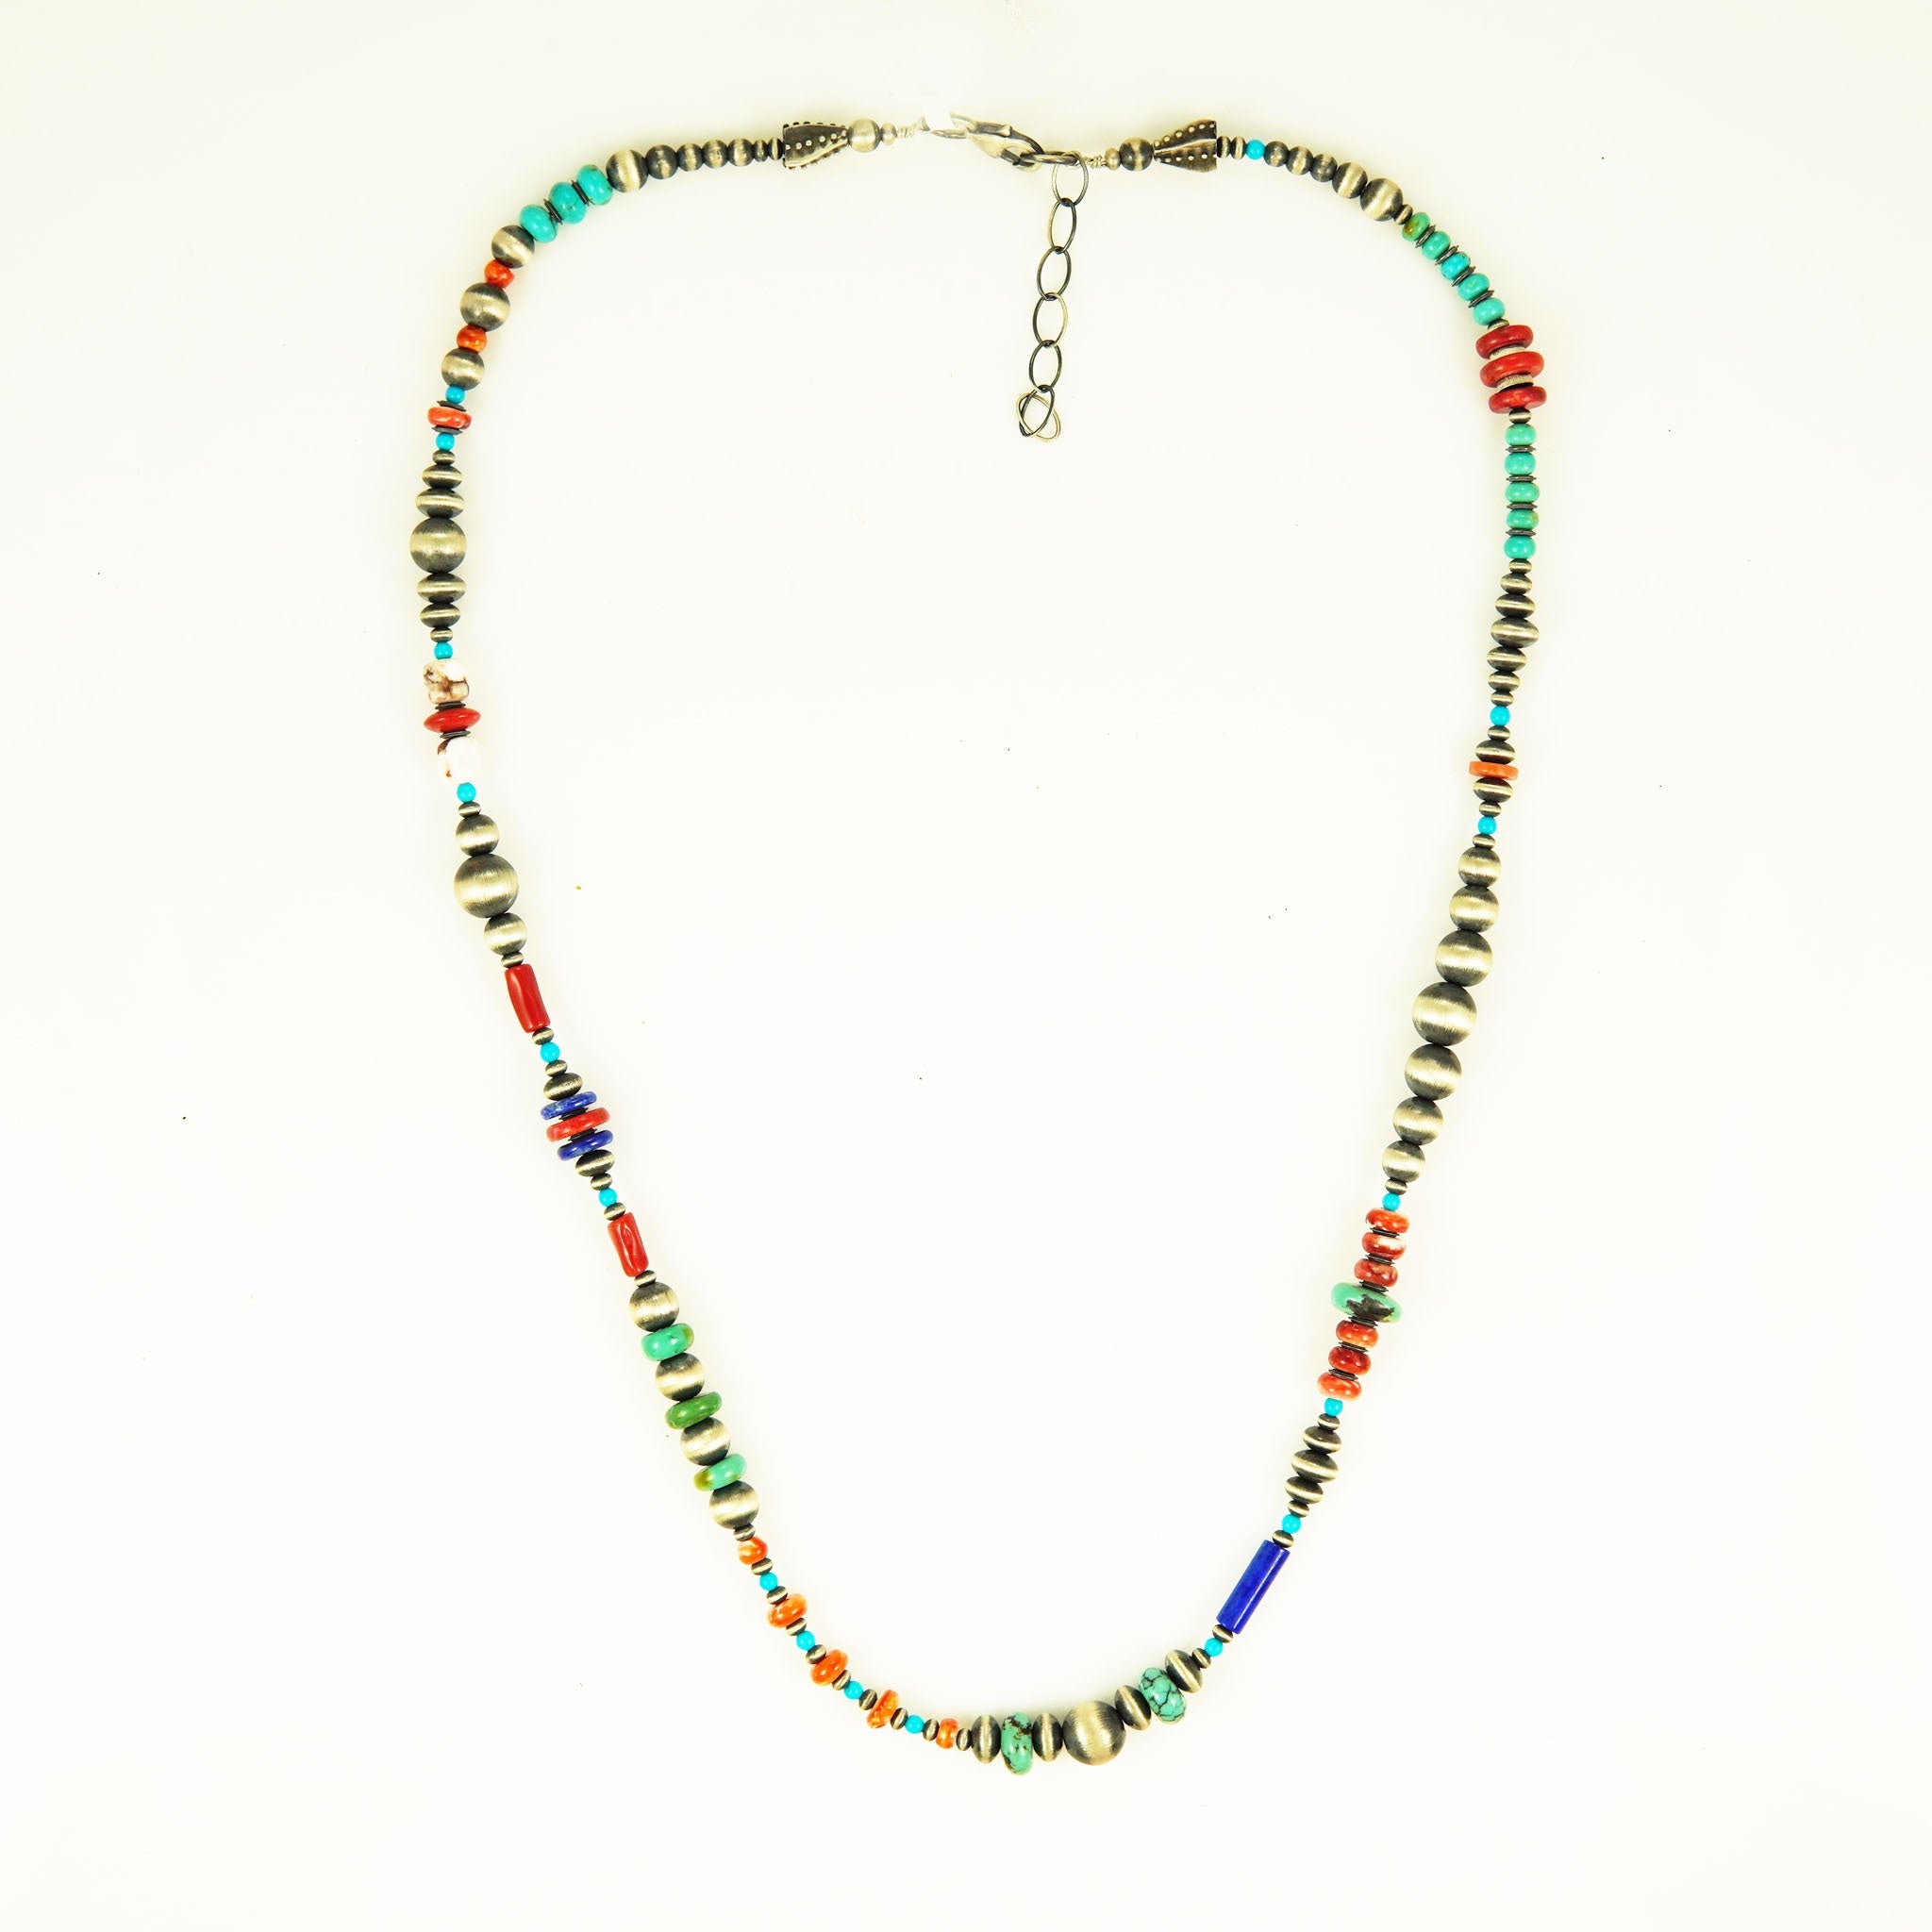 Kingman and Sleeping Beauty Turquoise, Coral, and Stony Oyster Navajo Bead 24-Inch Necklace